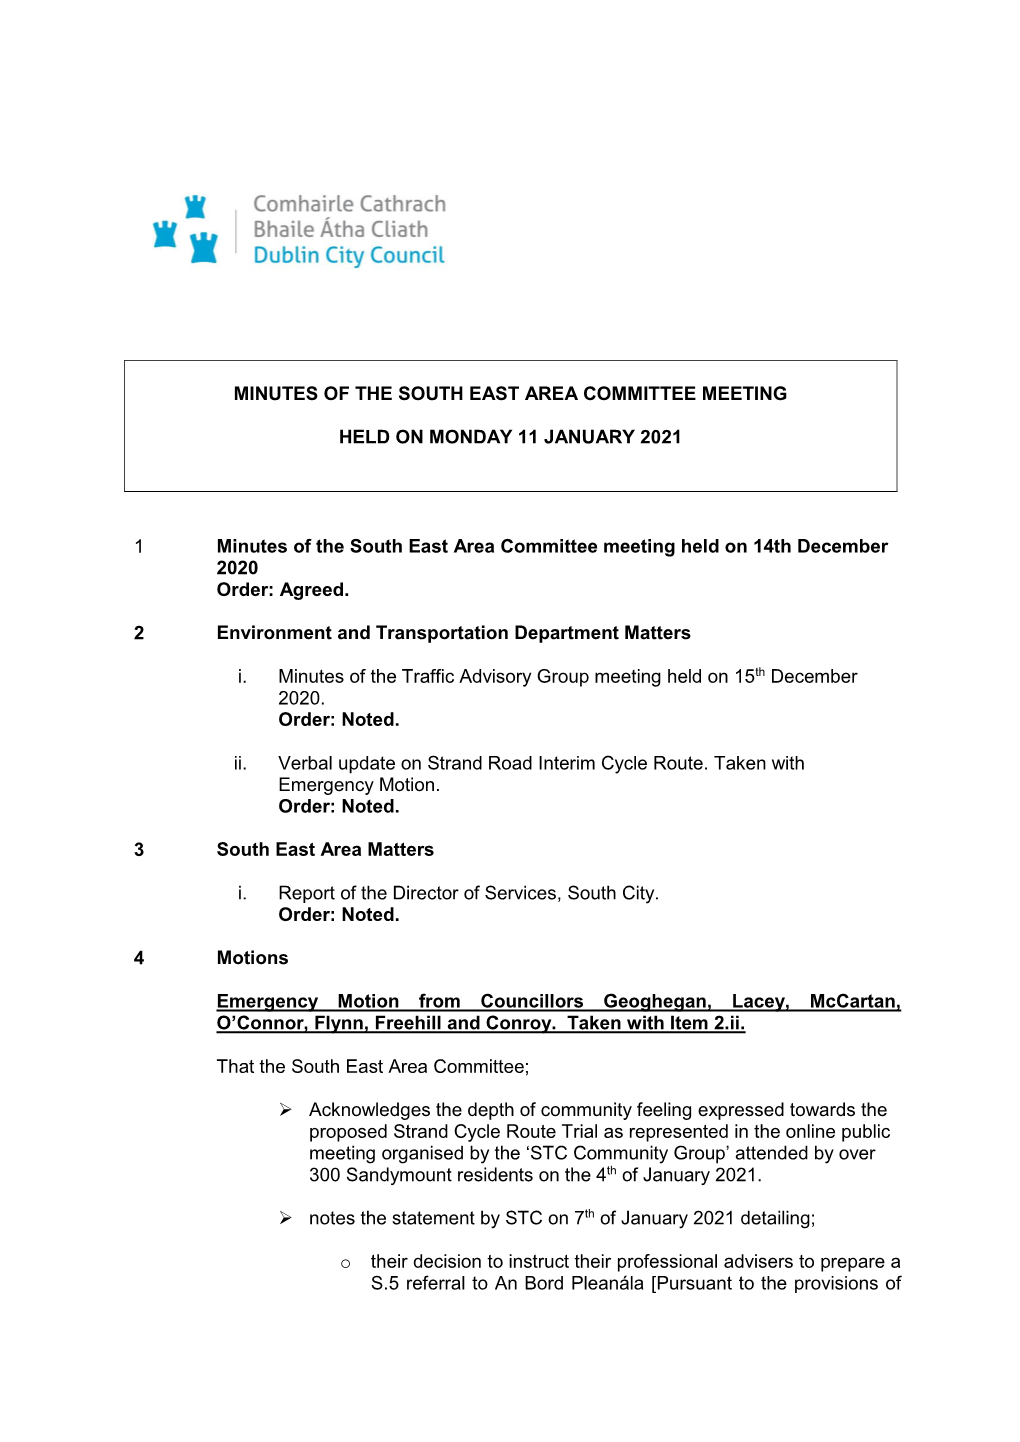 Minutes of the South East Area Committee Meeting